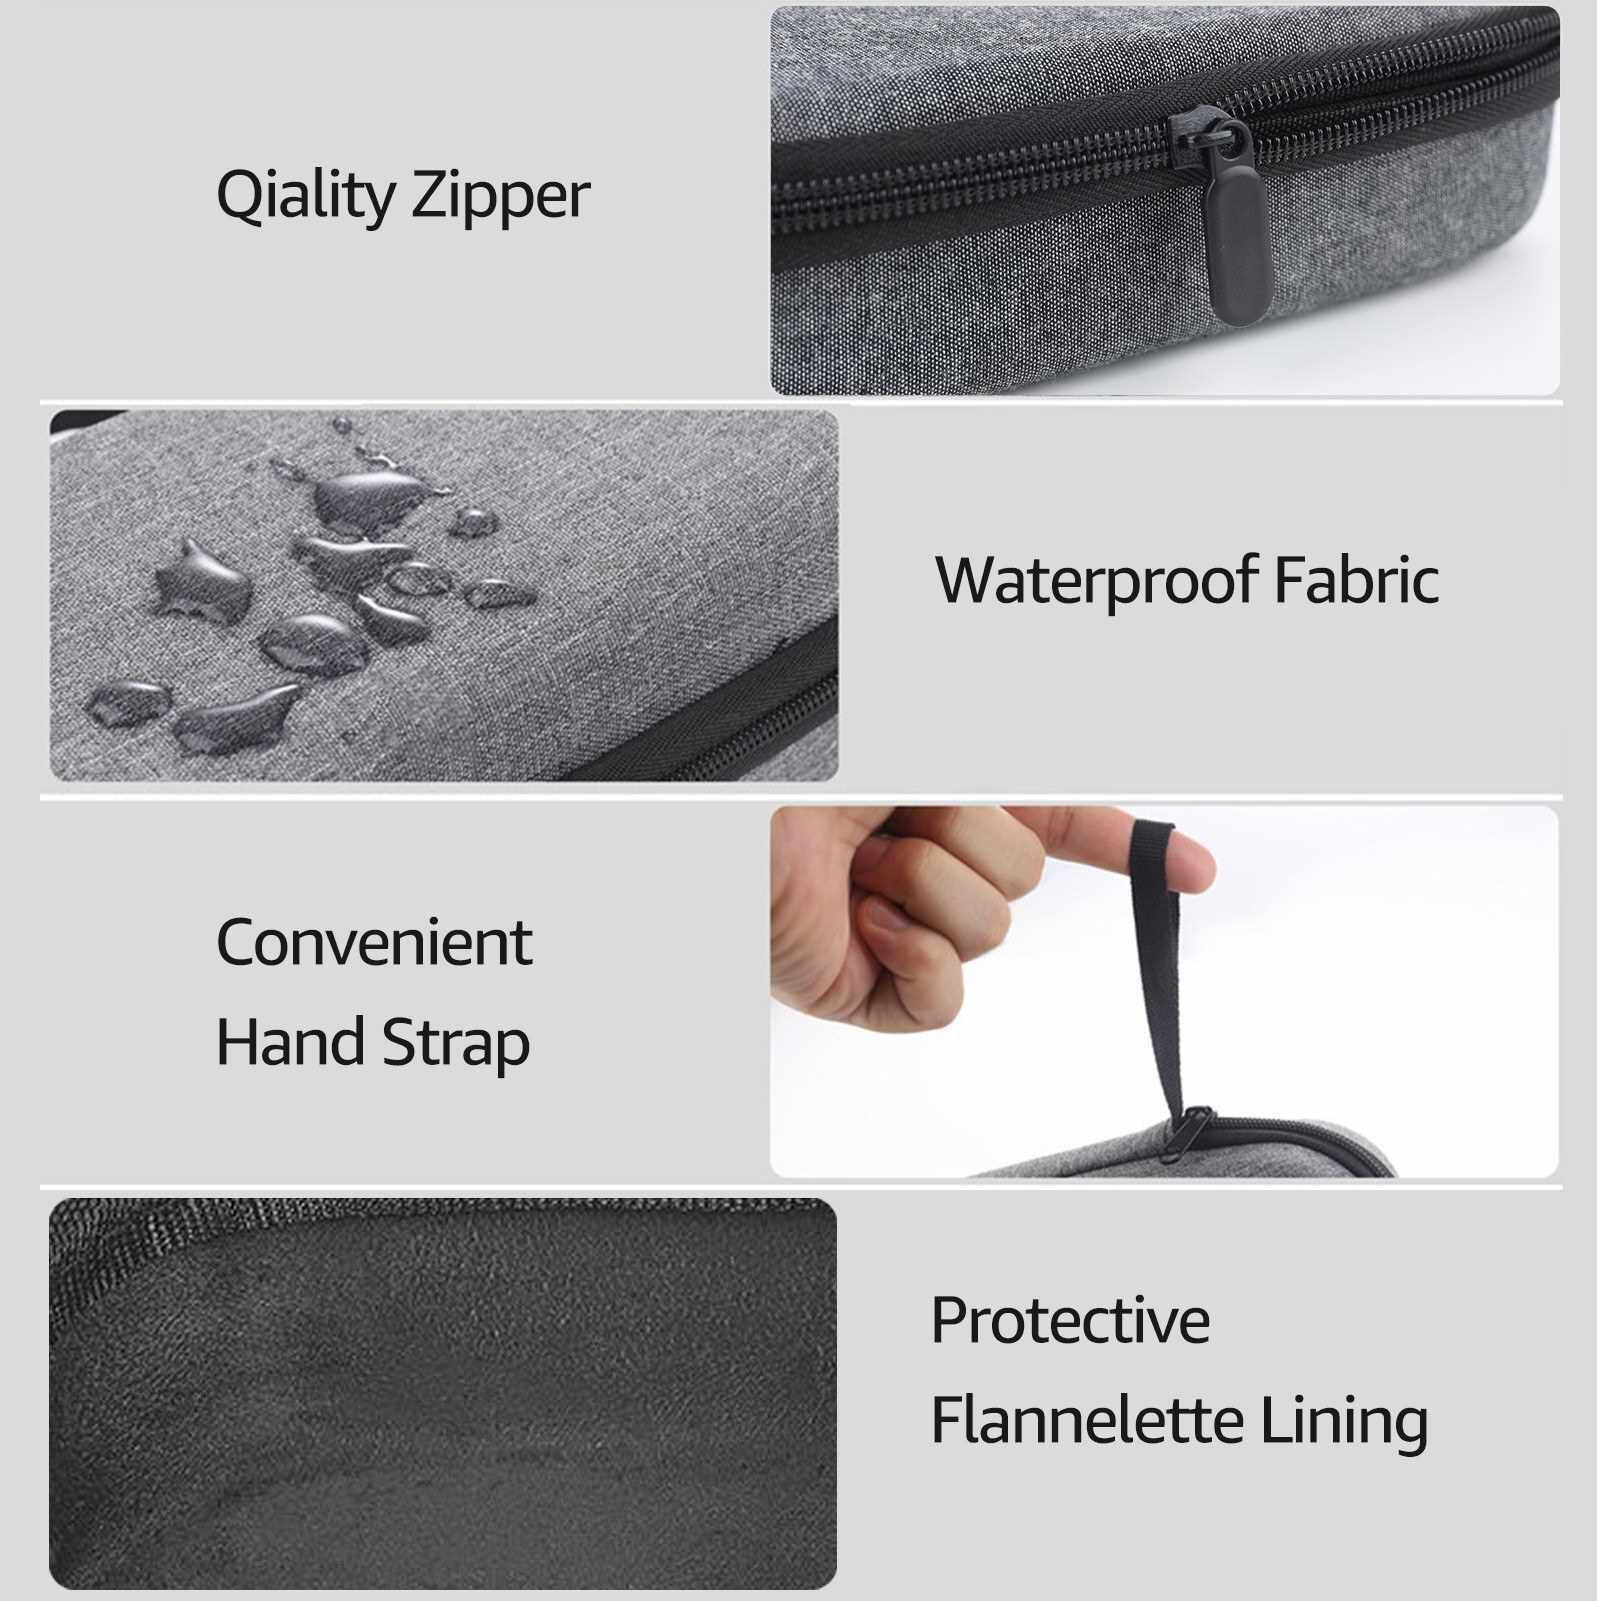 People's Choice Gimbal Portable Bag Waterproof Storage Bag Stabilizer Carrying Case with Lanyard Replacement for Hohem iSteady X Zhiyun XS Feiyu Vimble One Smartphone Gimbal (Grey)